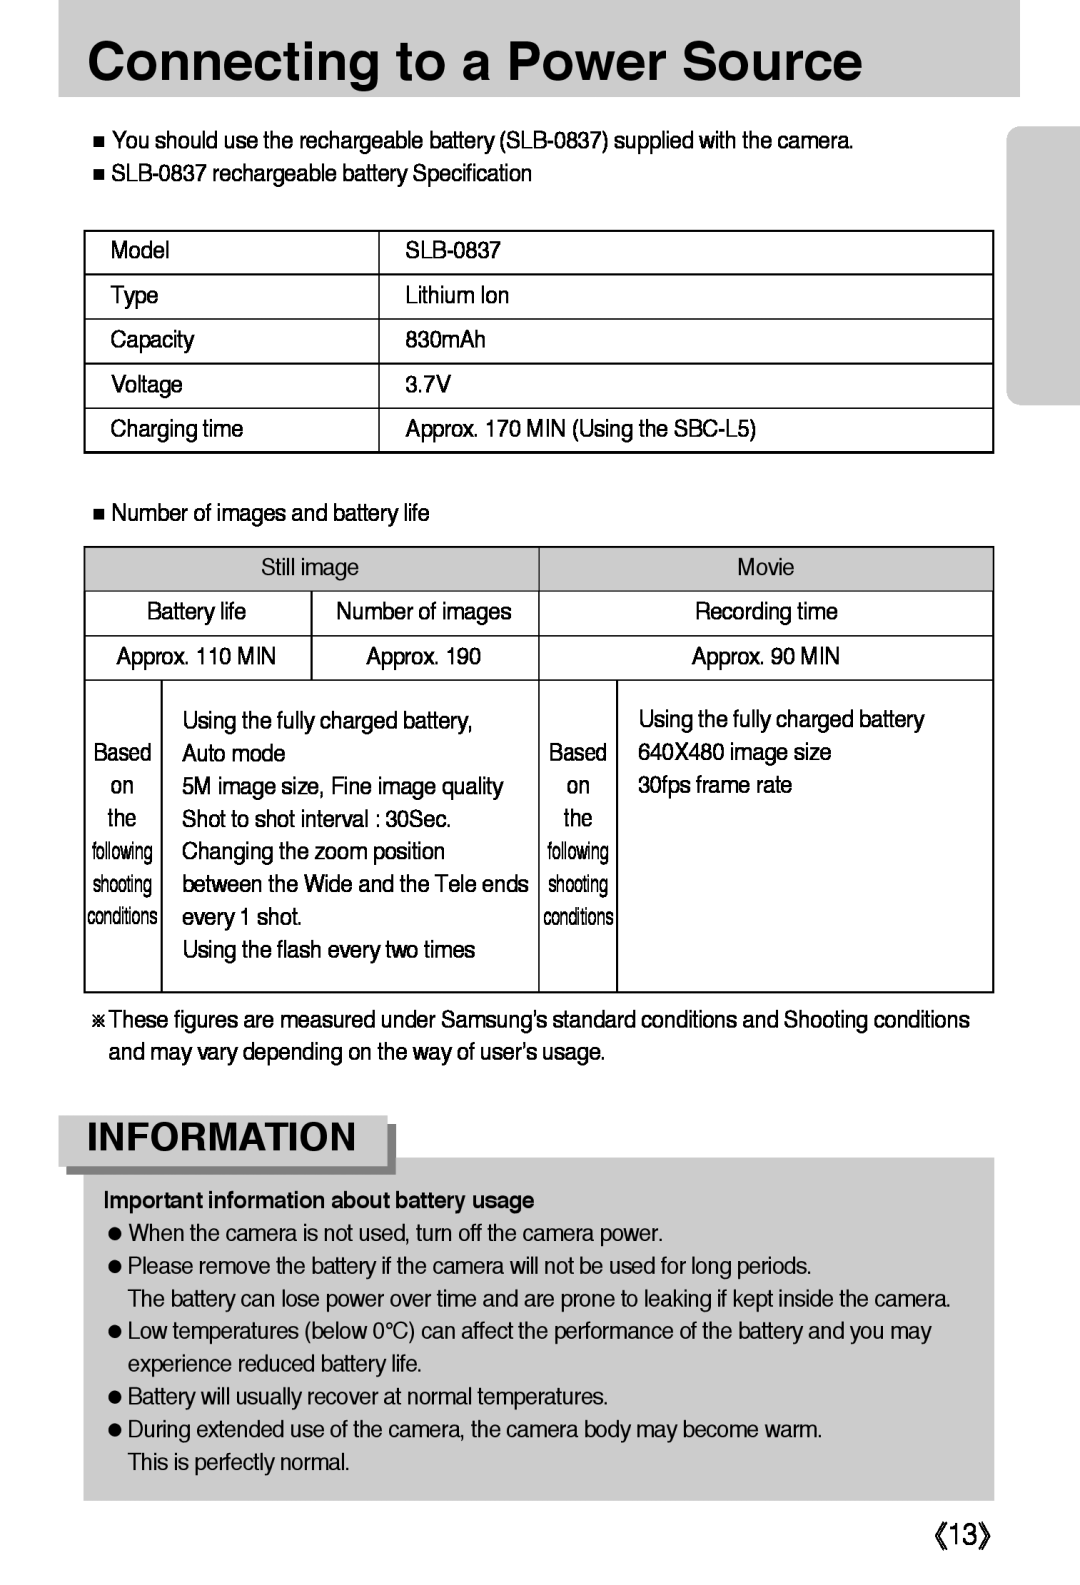 Samsung L50 user manual Connecting to a Power Source, Information, 《13》 